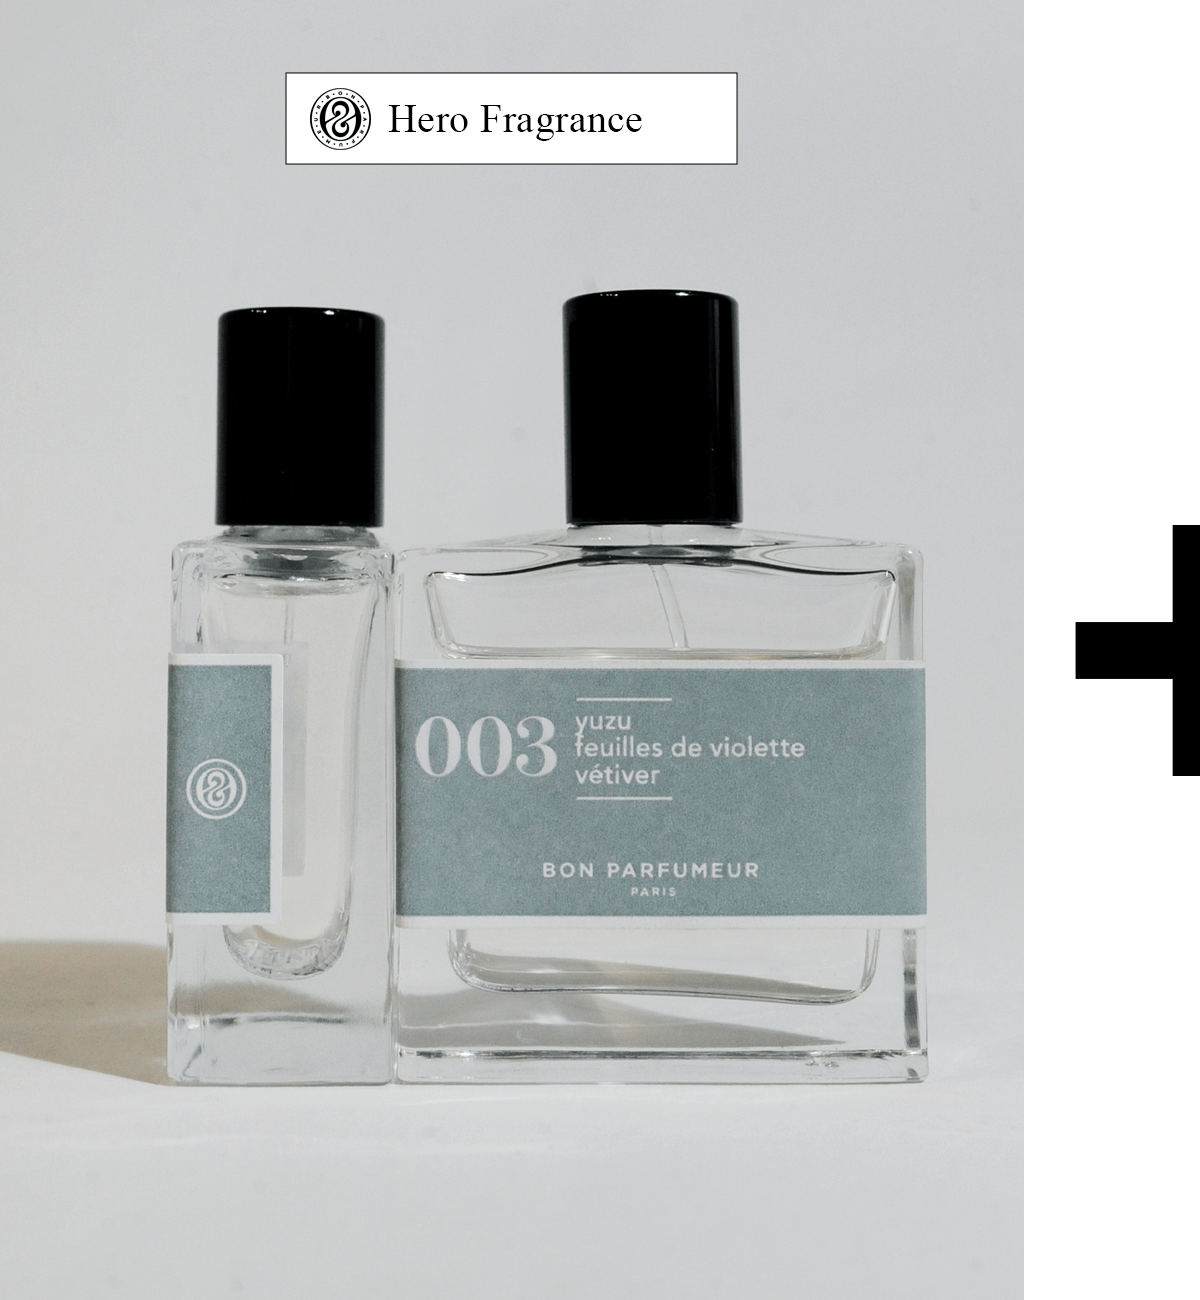 Two botles of Bon Parfumeur Cologne side by side.